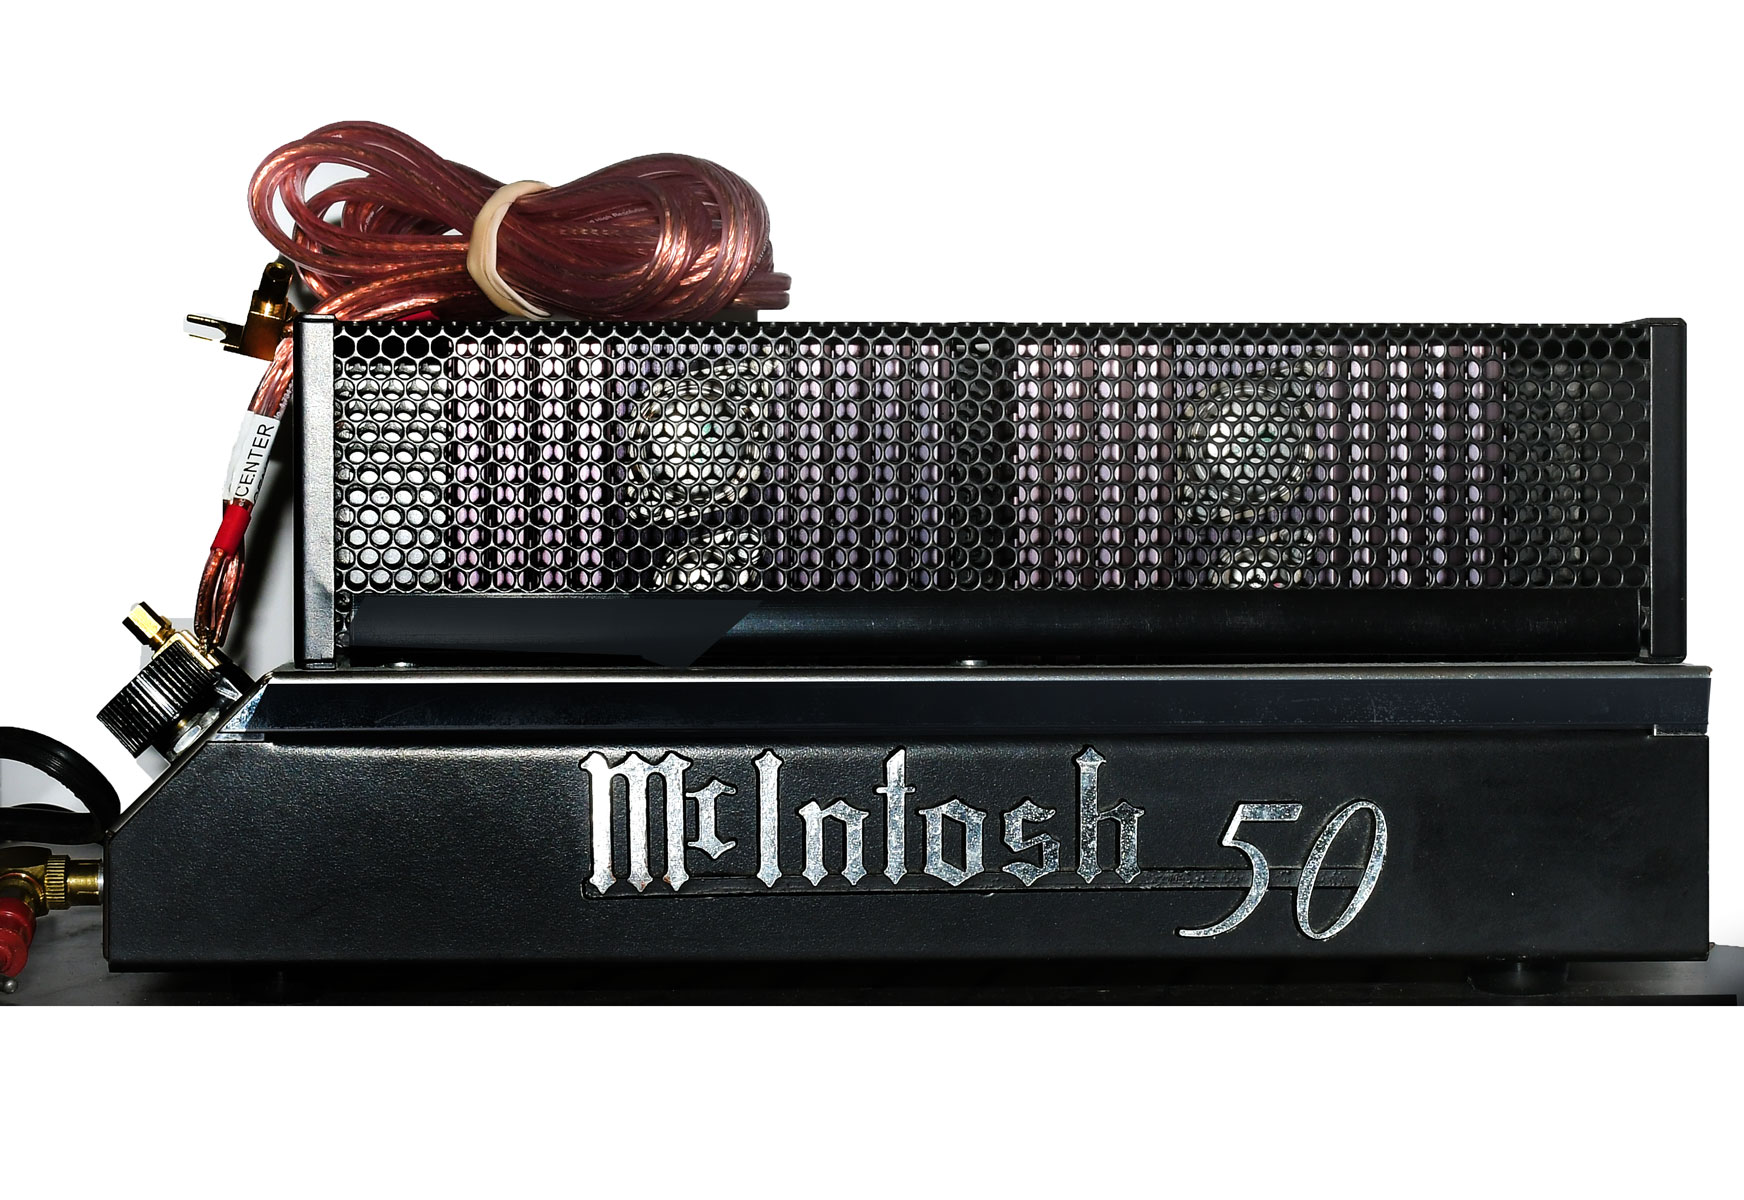 MCINTOSH 50 AMPLIFIER: From the